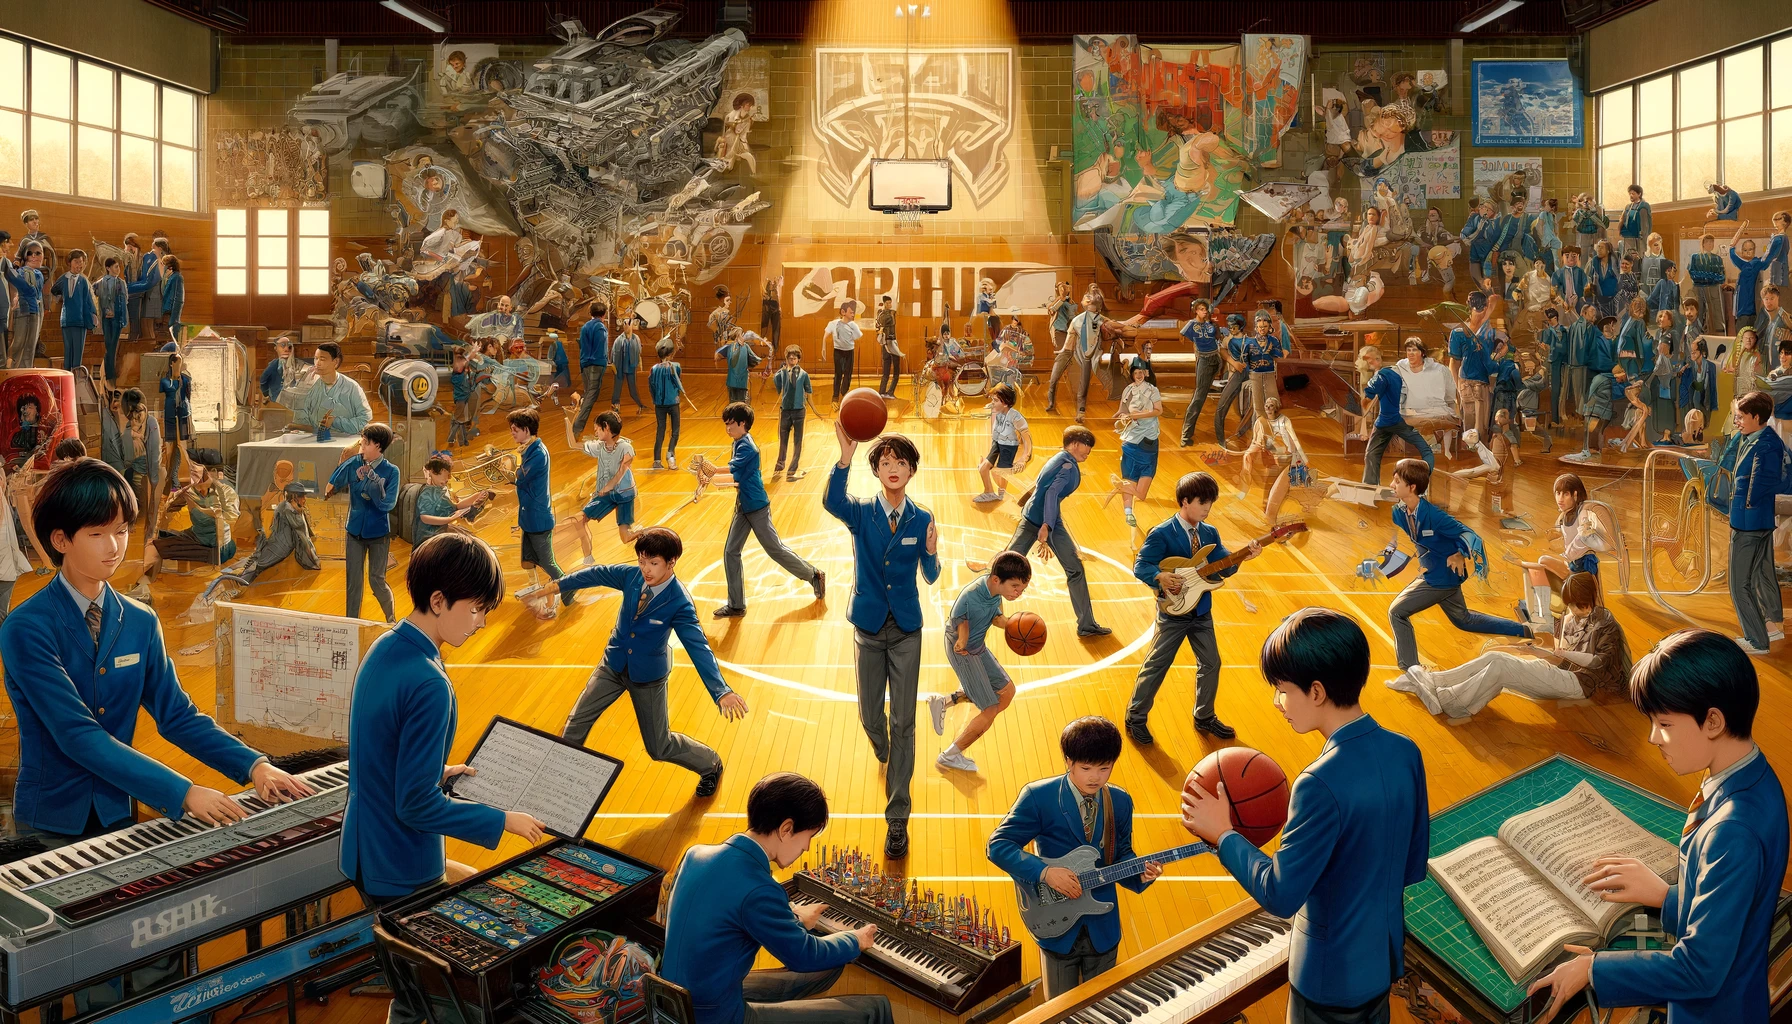 An energetic scene at Asahi High School focusing on students engaged in various club activities. The image depicts students participating in a range of extracurricular activities such as a music band practice, a robotics club meeting, and sports teams in action, like basketball and soccer. The environment is lively and filled with enthusiasm, showcasing the students' passion and teamwork. The school's spirit is highlighted by the word 'ASAHI' displayed in bold English letters in a prominent part of the scene, reflecting the school's vibrant community spirit.